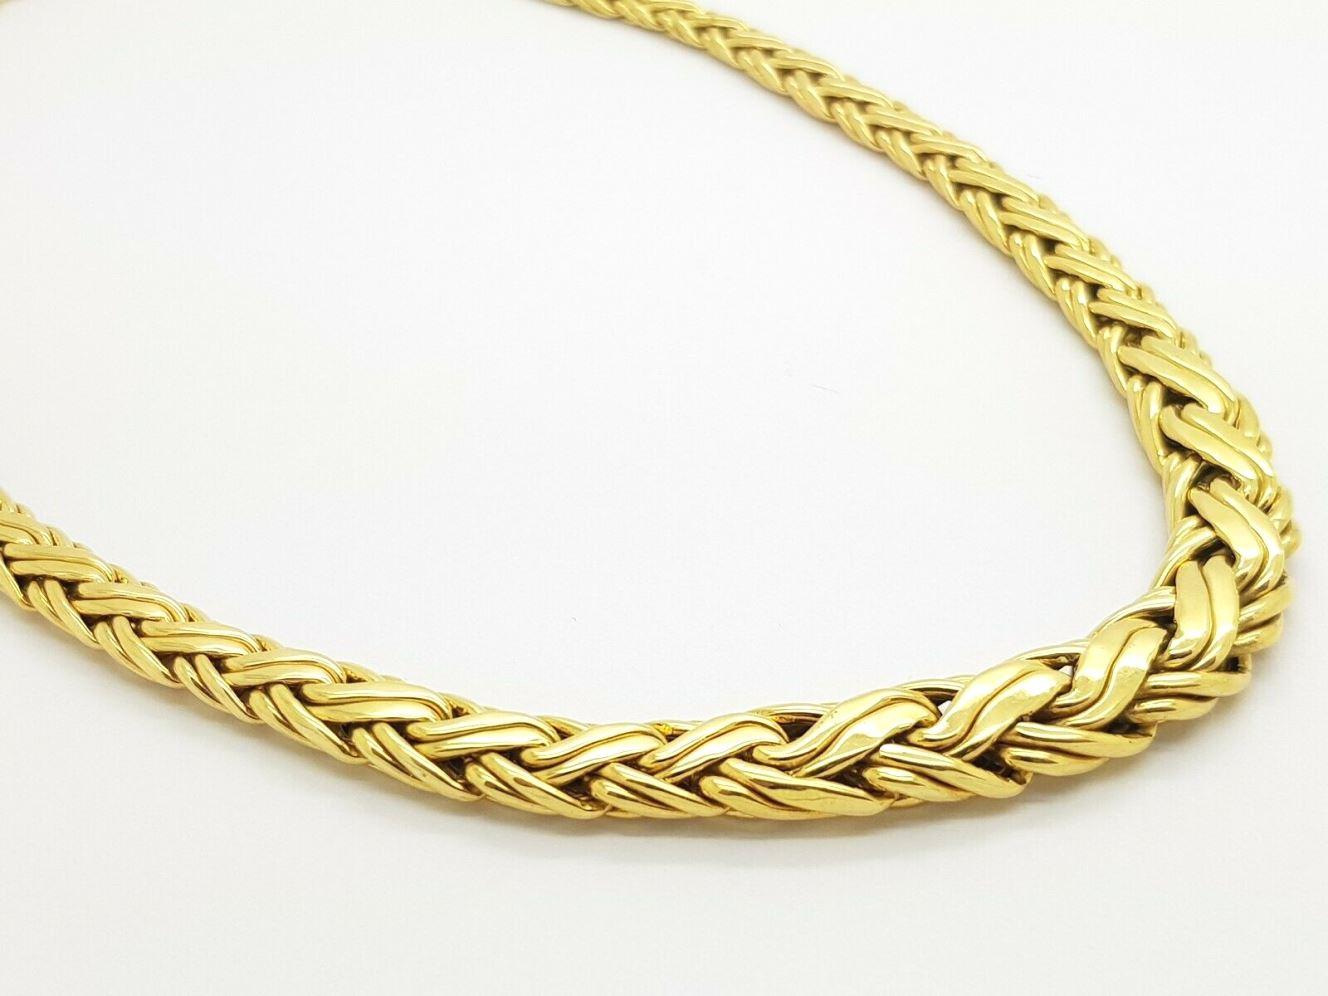 TIFFANY & Co. 18K Gold Graduated Weave Necklace  In Excellent Condition For Sale In Los Angeles, CA